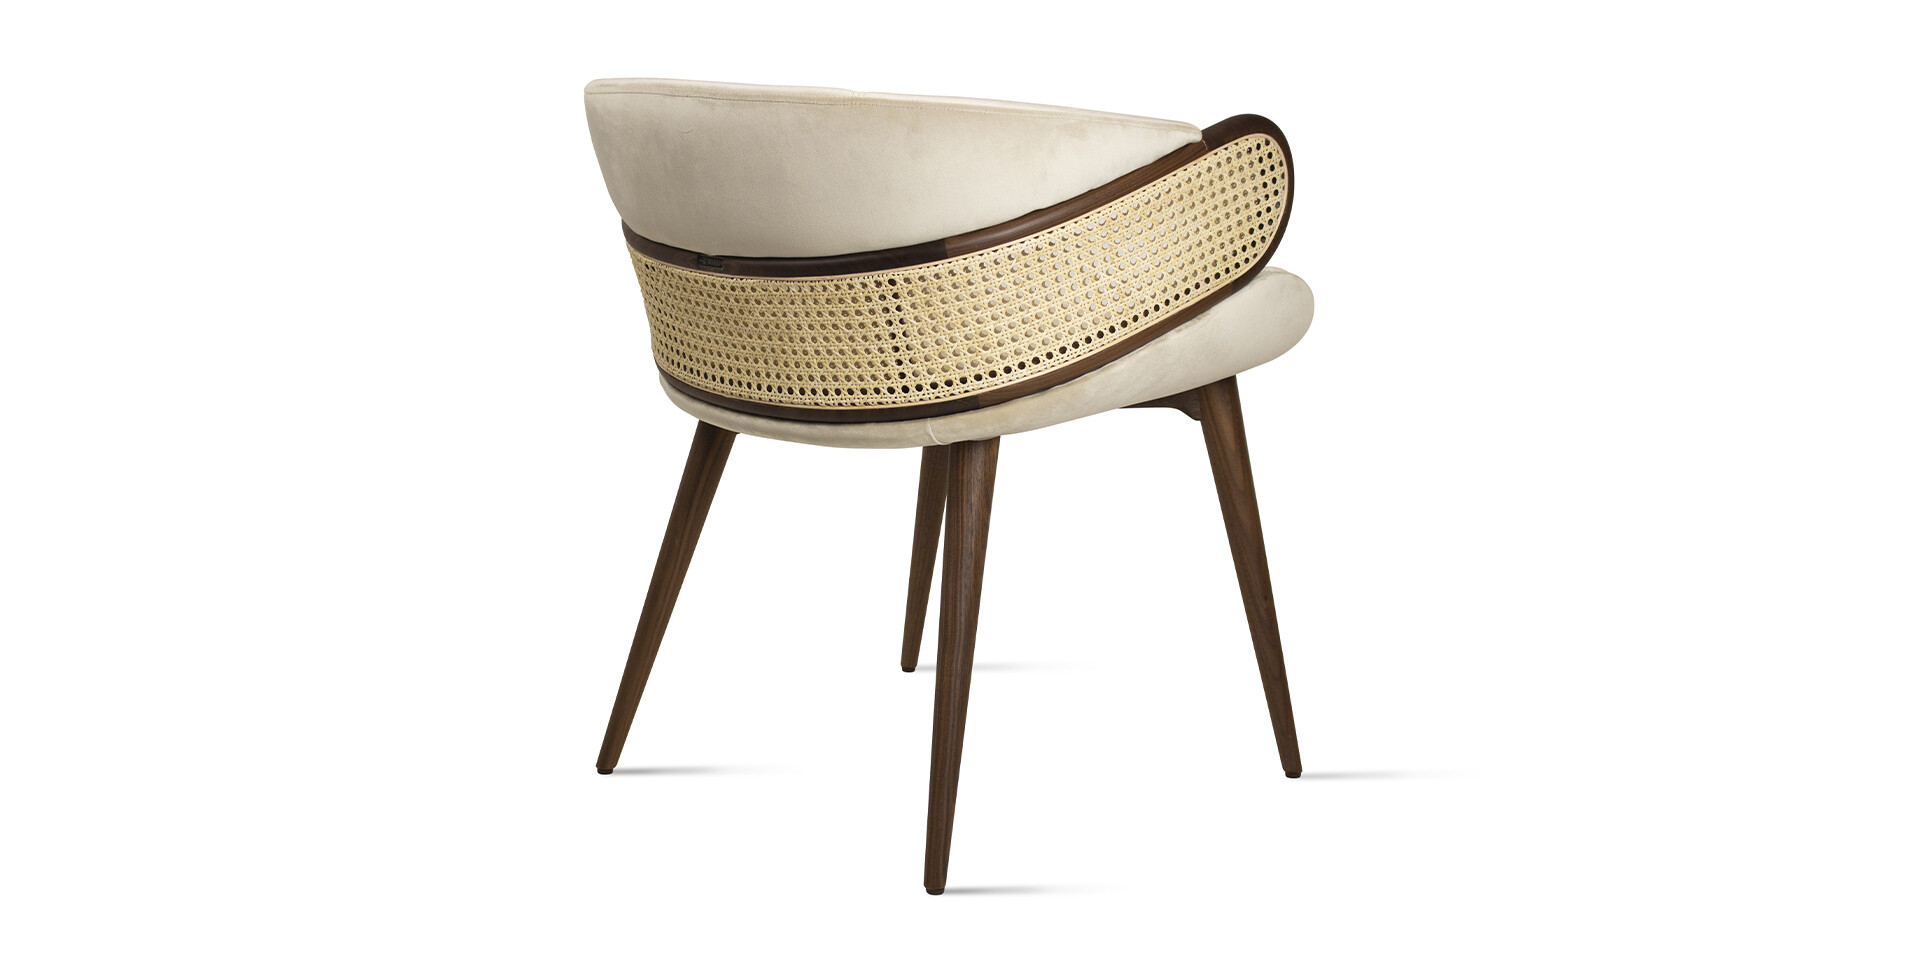 MUDHIF DINING ARMCHAIR Perspective Back View ALMA de LUCE